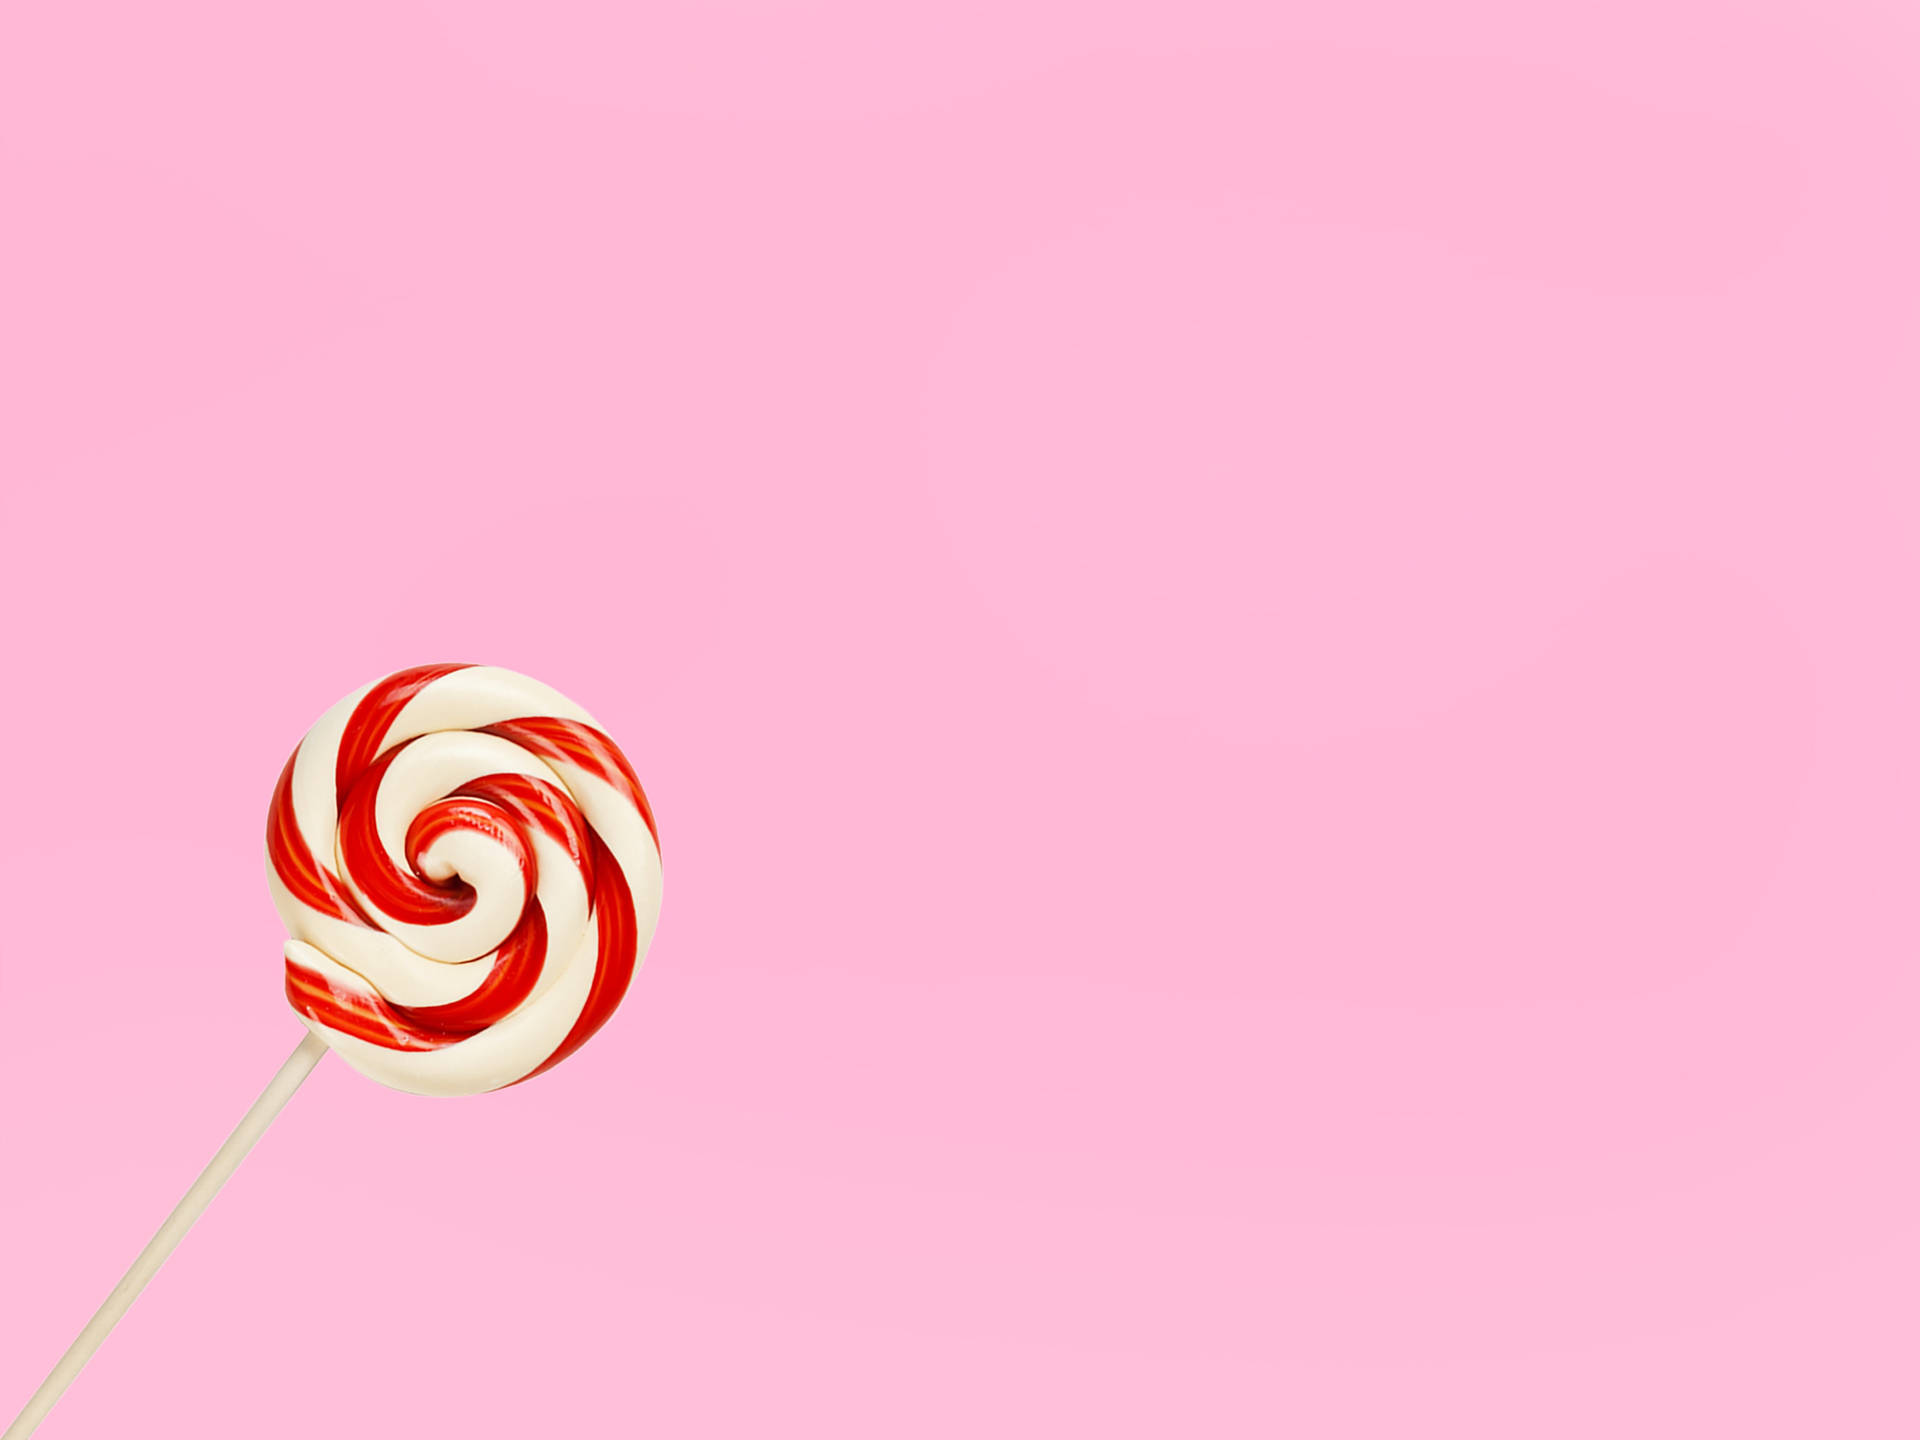 Cute Pastel Aesthetic Pink Swirl Candy